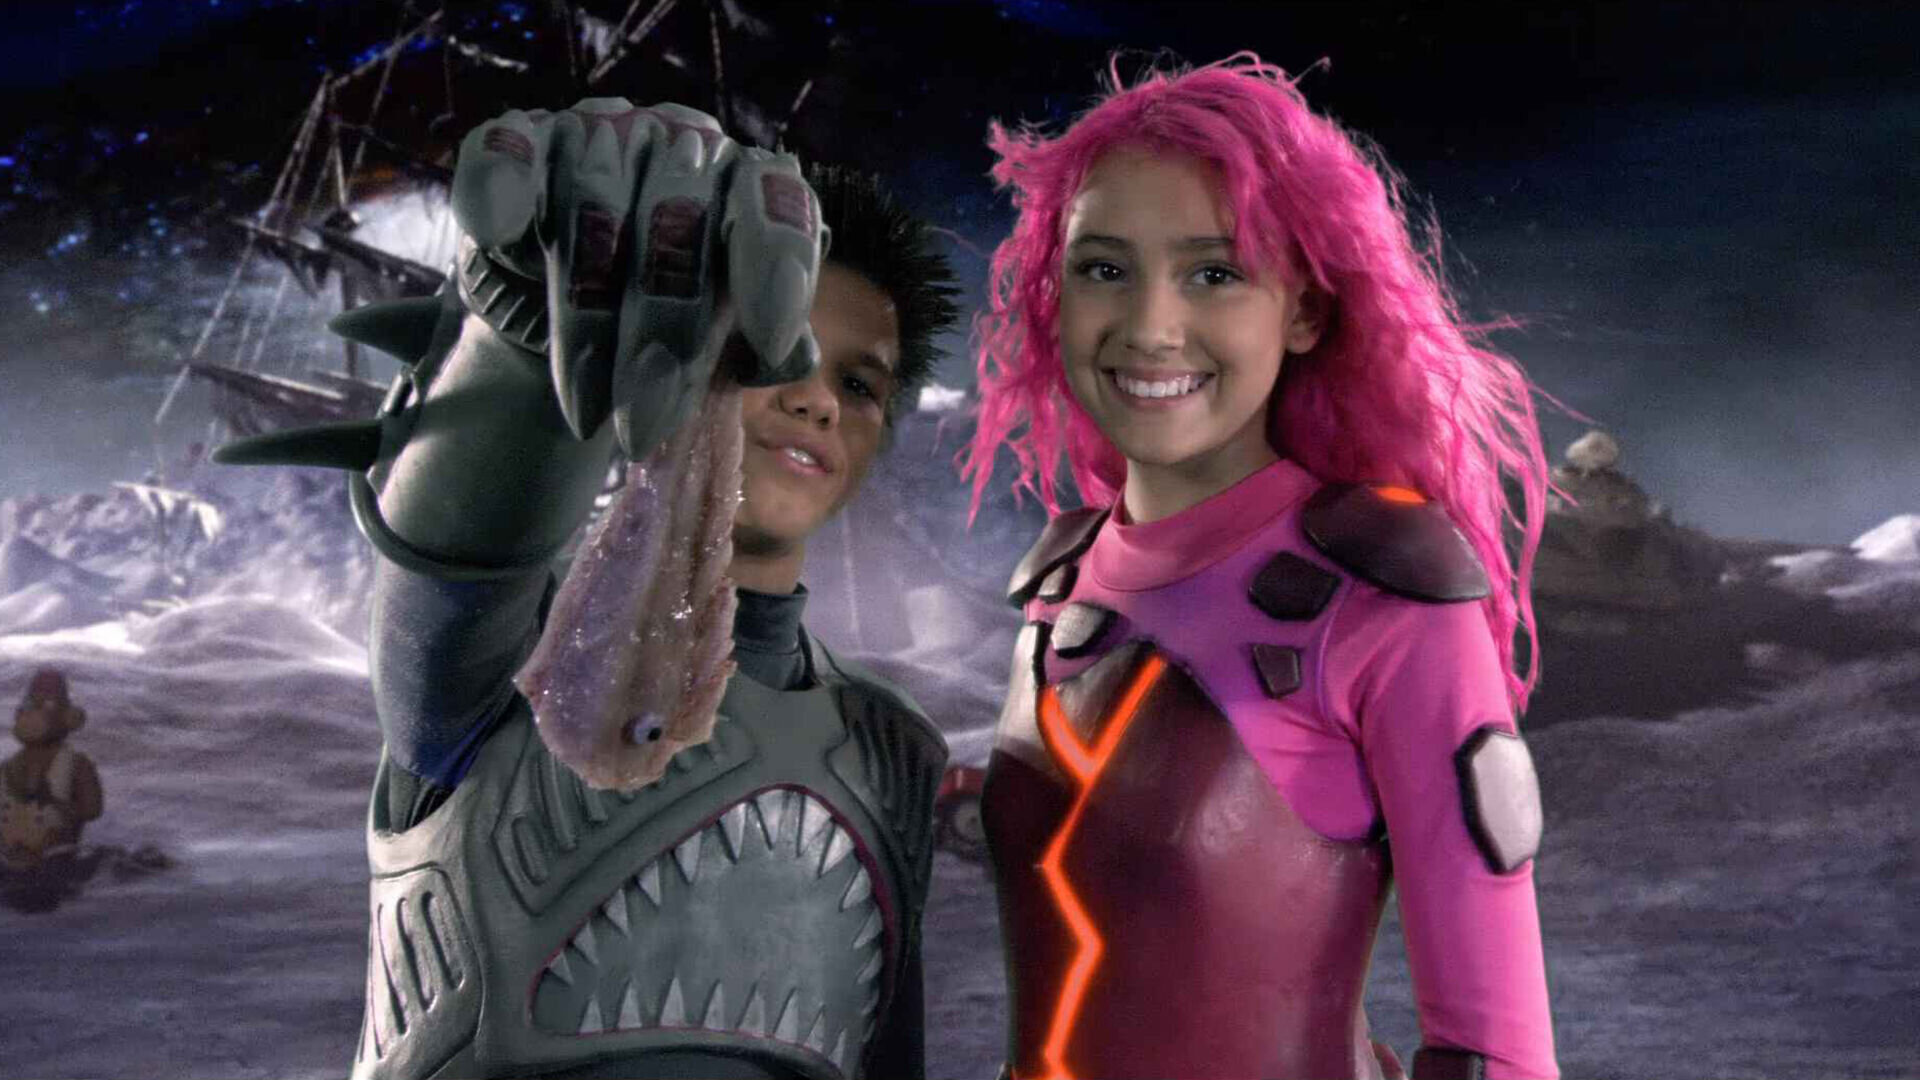 Stills from The Adventures of Sharkboy and Lavagirl 3-D.